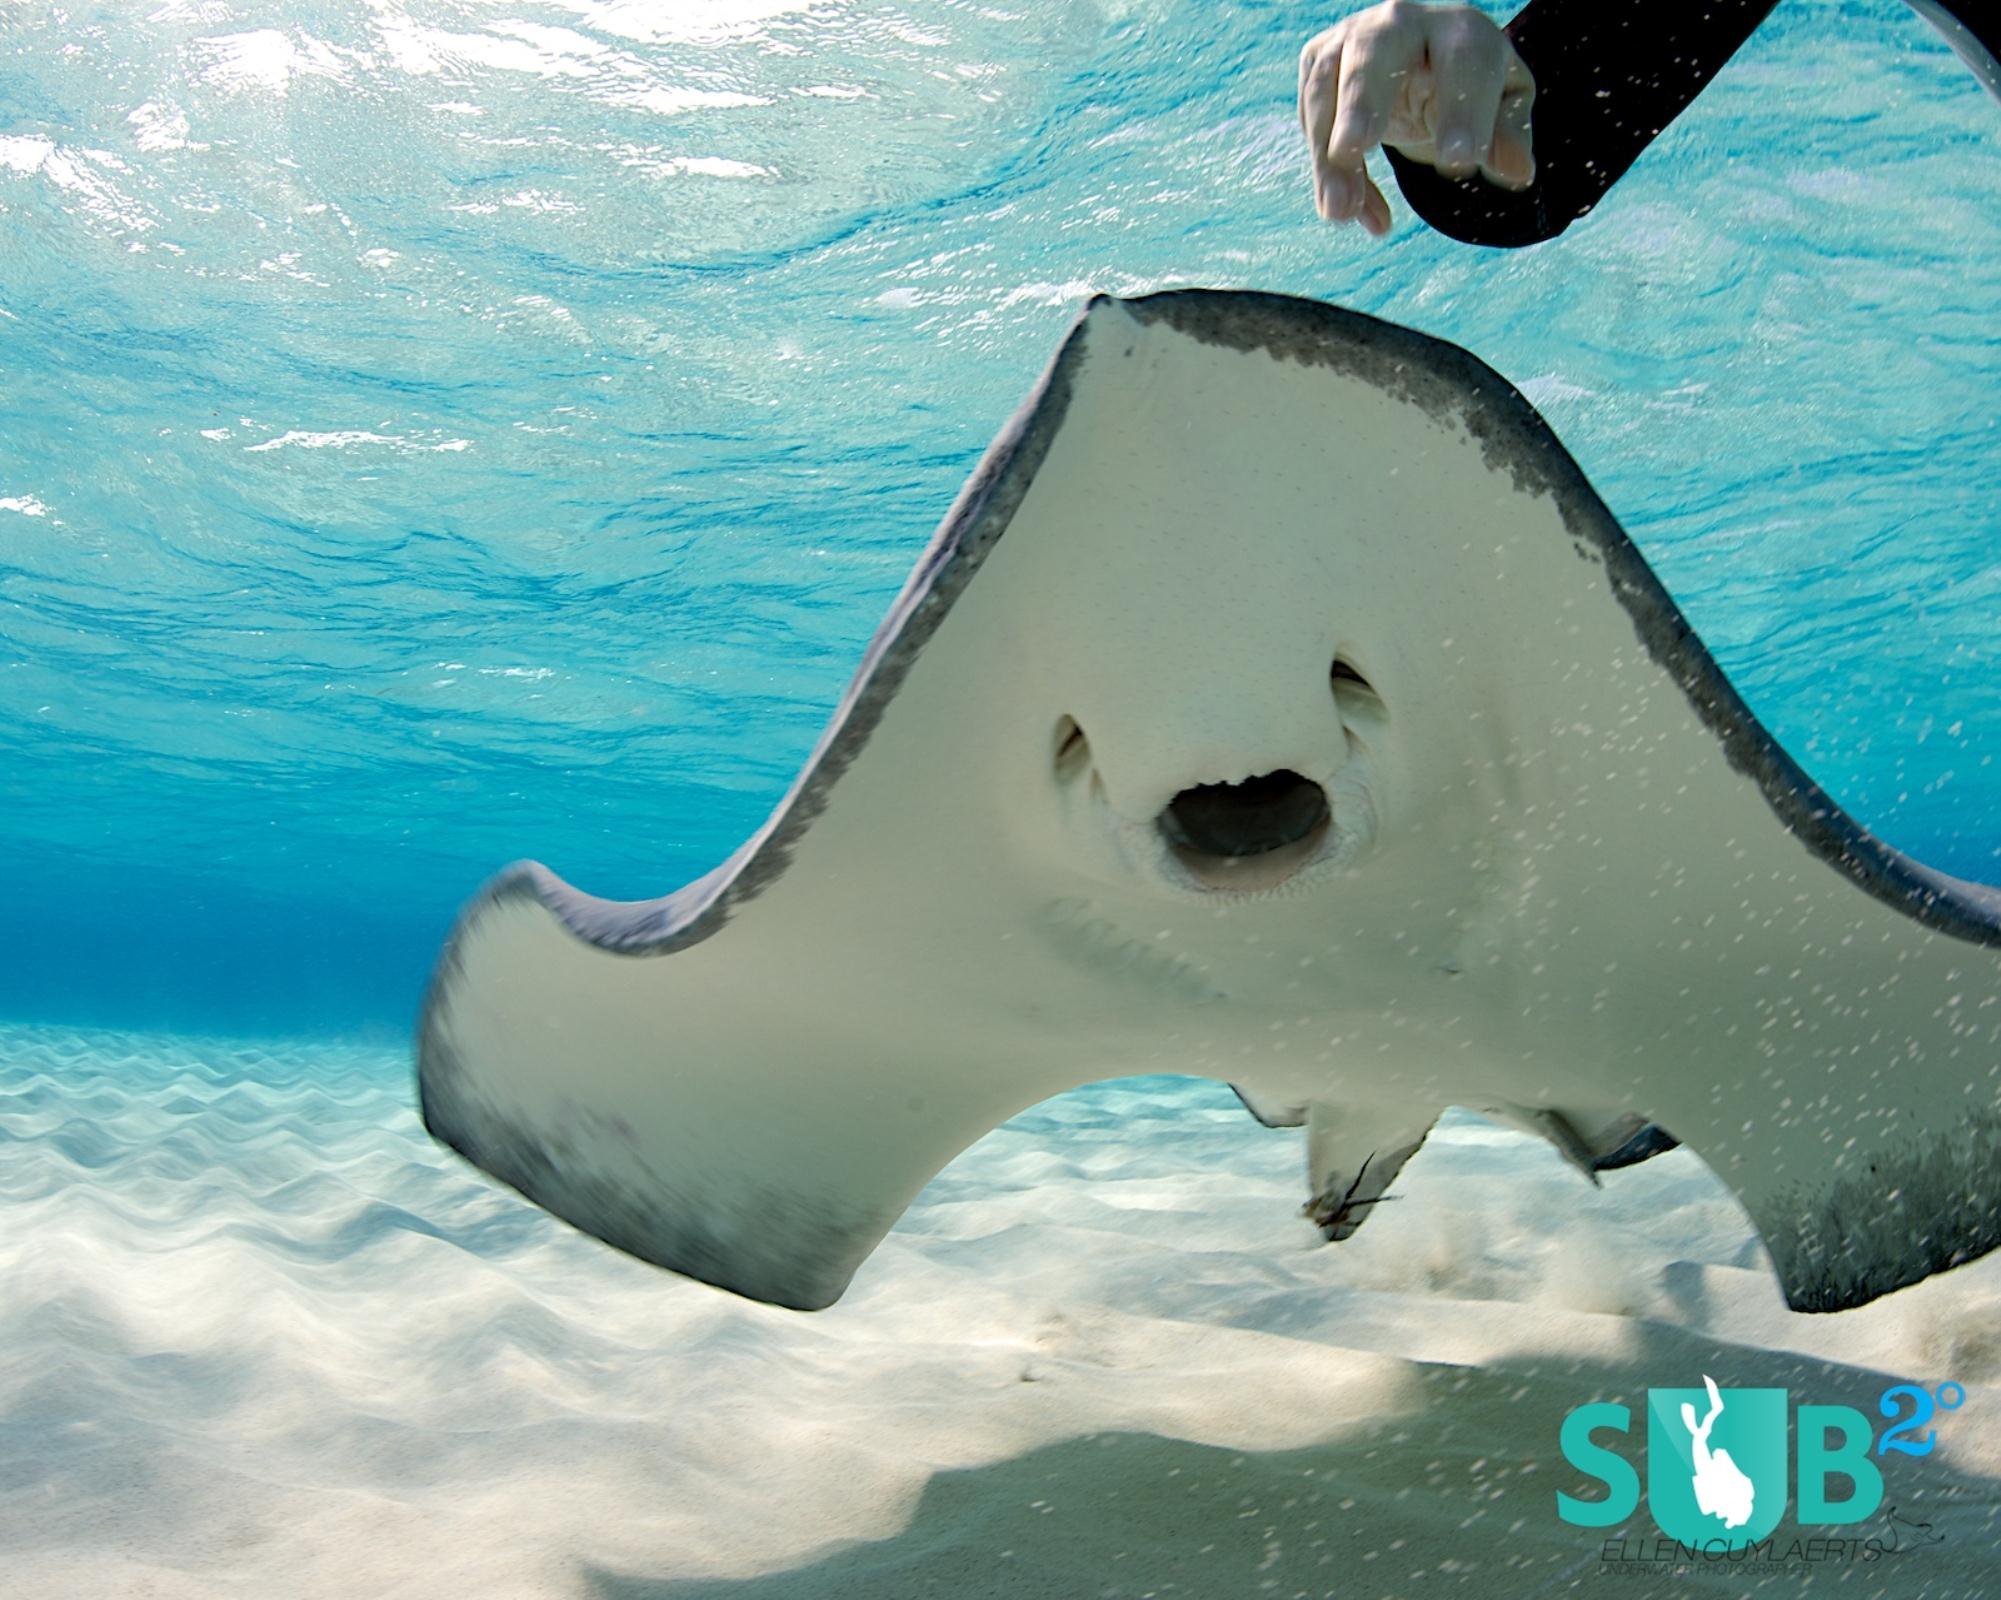 Stingrays usually graze on the sandy bottom and when they find a mollusk, their stubby teeth are strong enough to crack the shell.